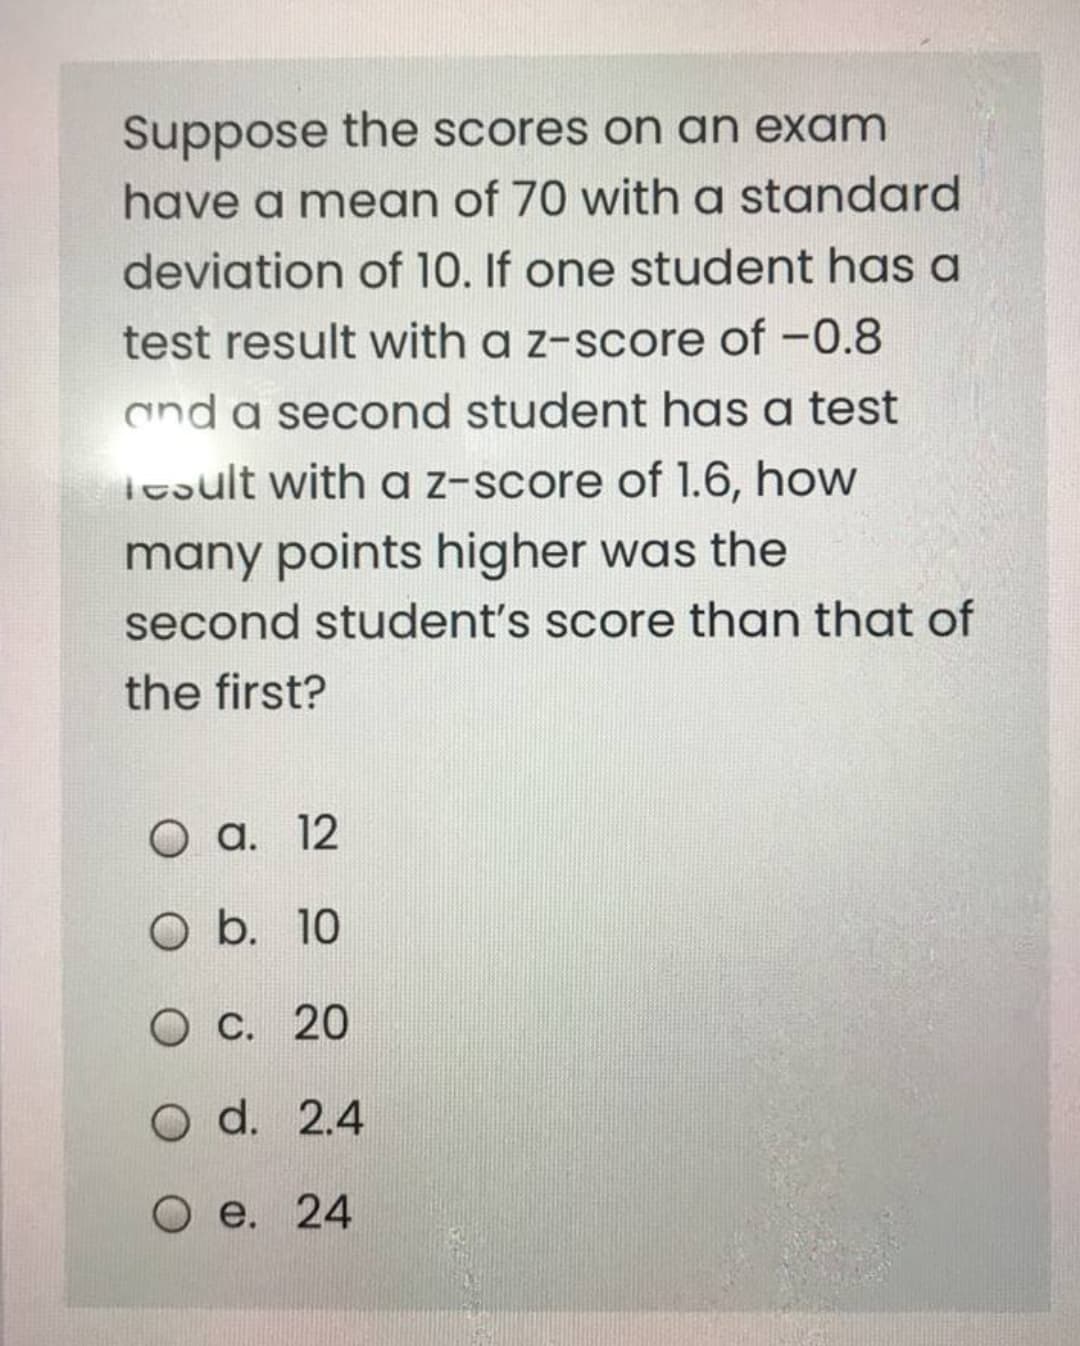 Suppose the scores on an exam
have a mean of 70 with a standard
deviation of 10. If one student has a
test result with a z-score of -0.8
and a second student has a test
Tesult with a z-score of 1.6, how
many points higher was the
second student's score than that of
the first?
O a. 12
O b. 10
O C. 20
O d. 2.4
e. 24
